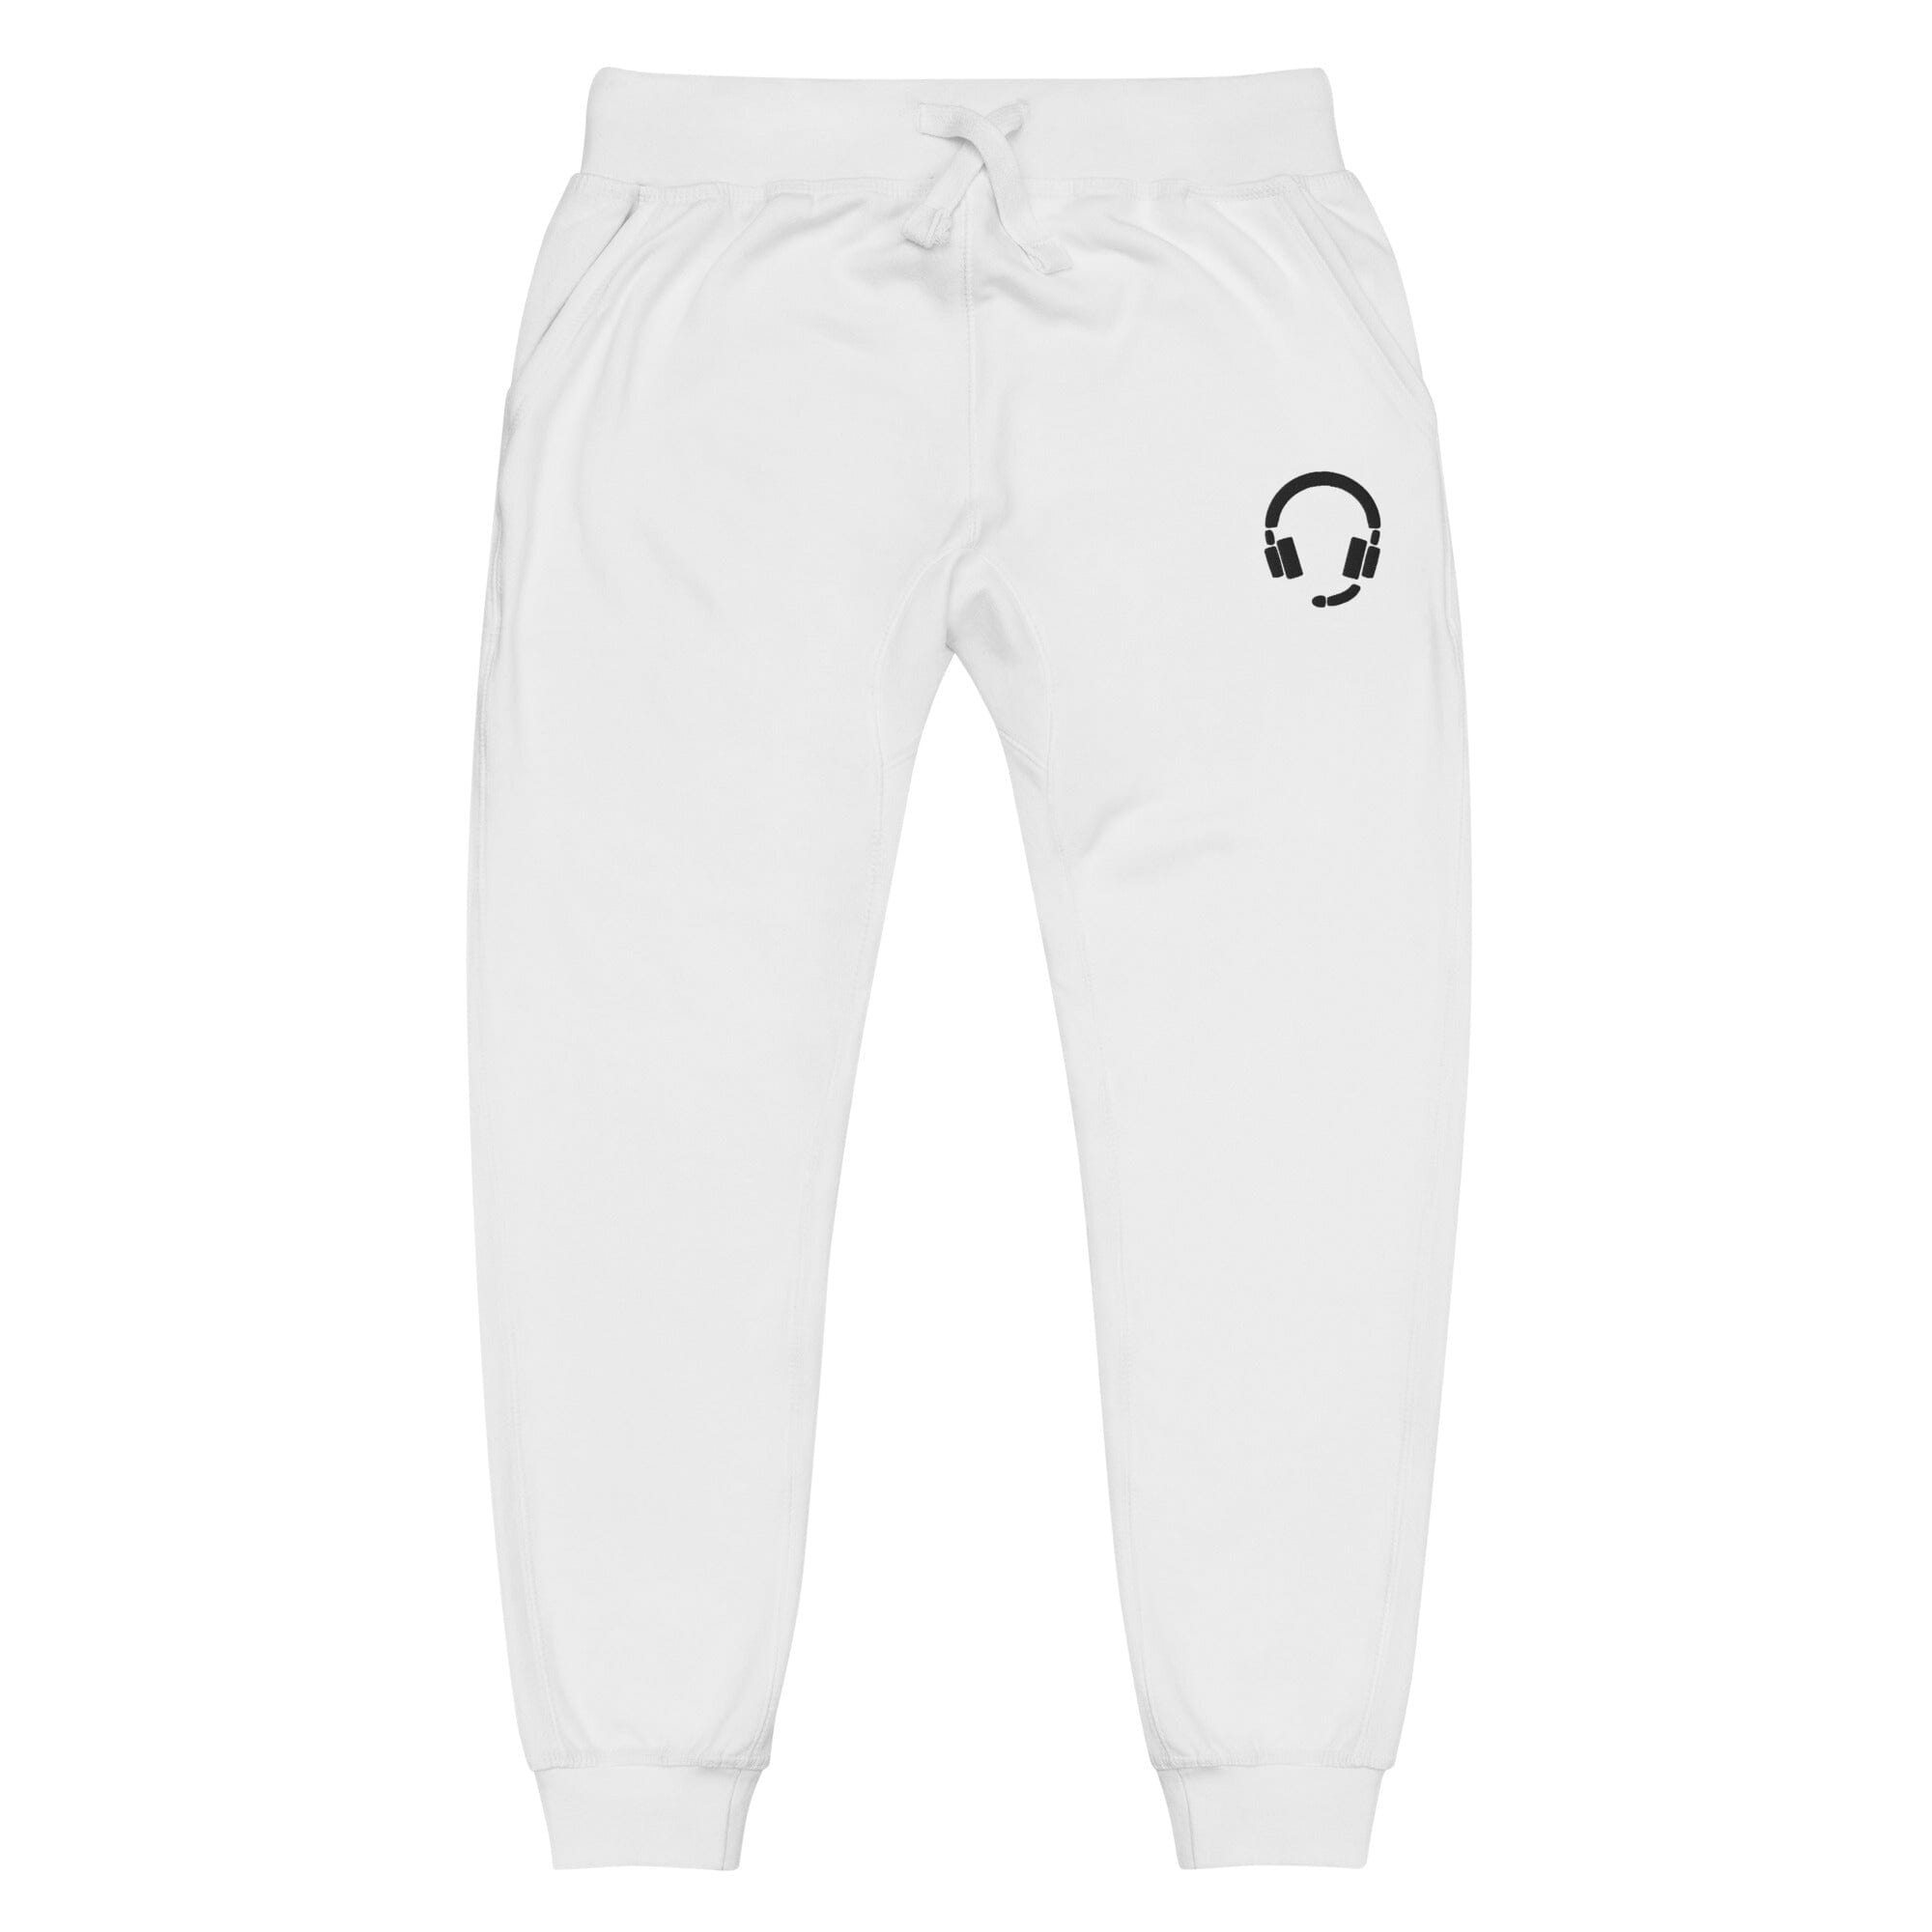 GLHF Headset | Unisex fleece sweatpants | Gamer Affirmations Threads & Thistles Inventory White XS 